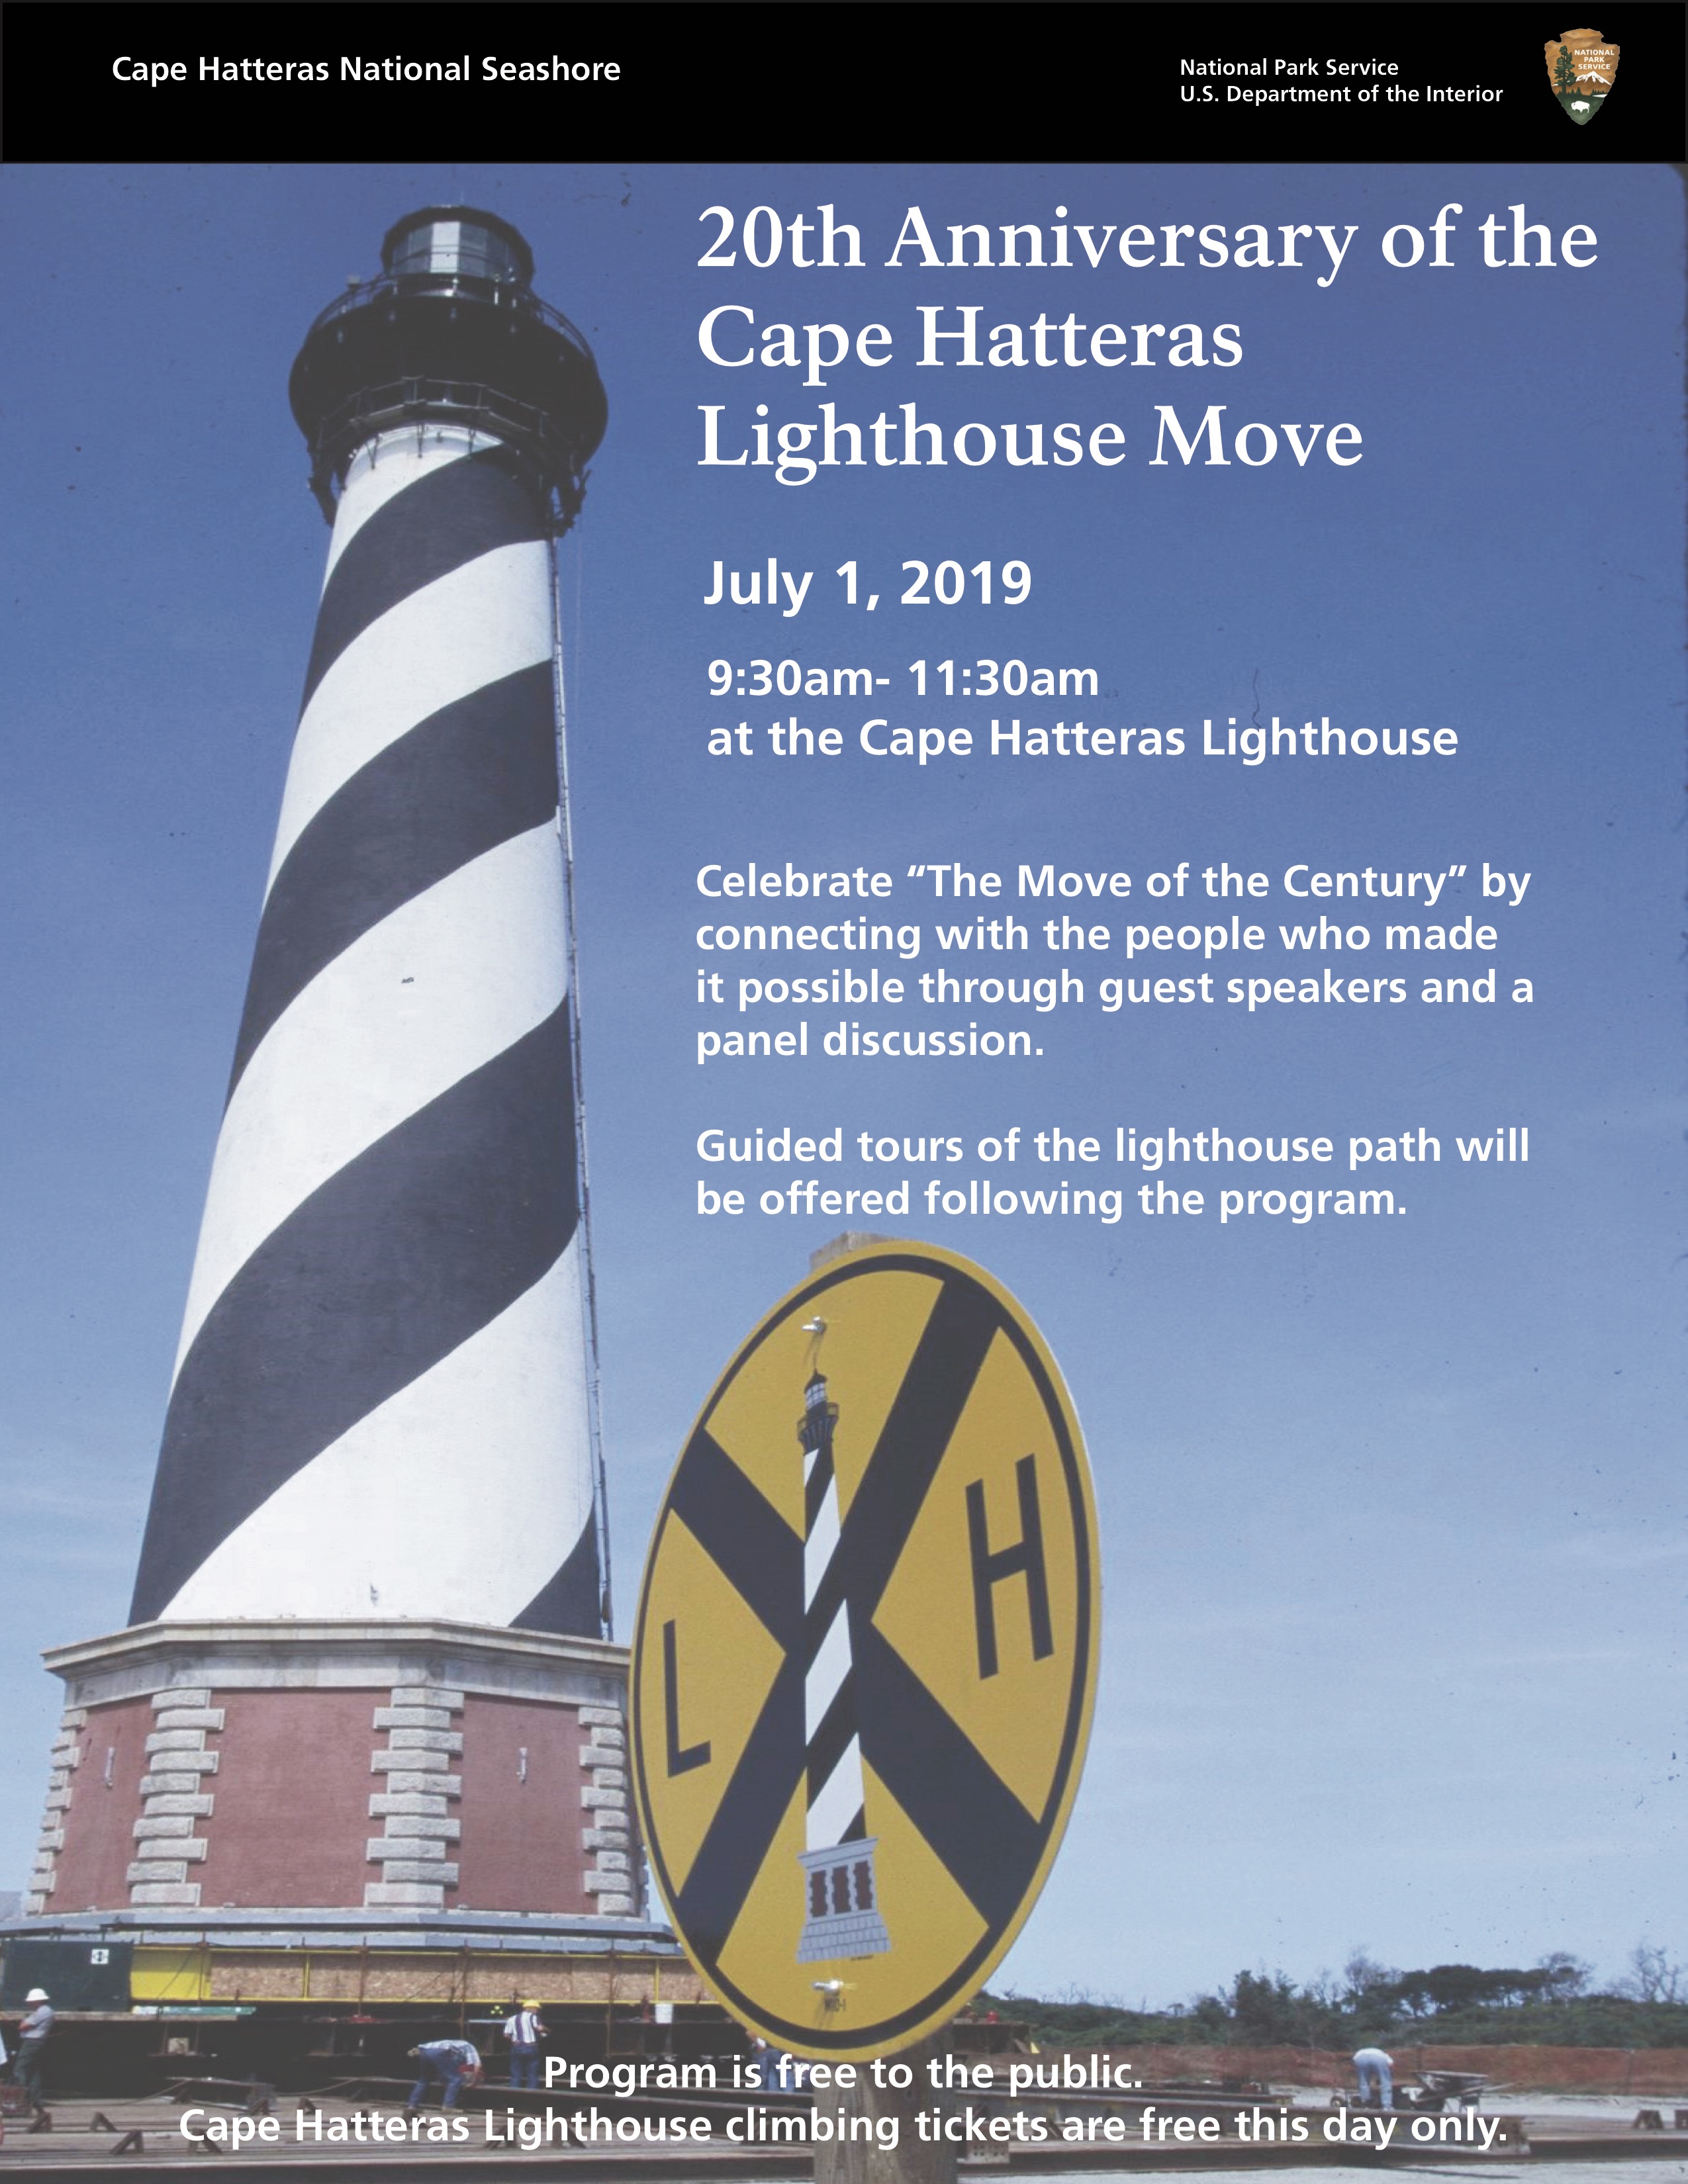 Flyer for the 20th anniversary of the Cape Hatteras Lighthouse move event on July 1, 2019.